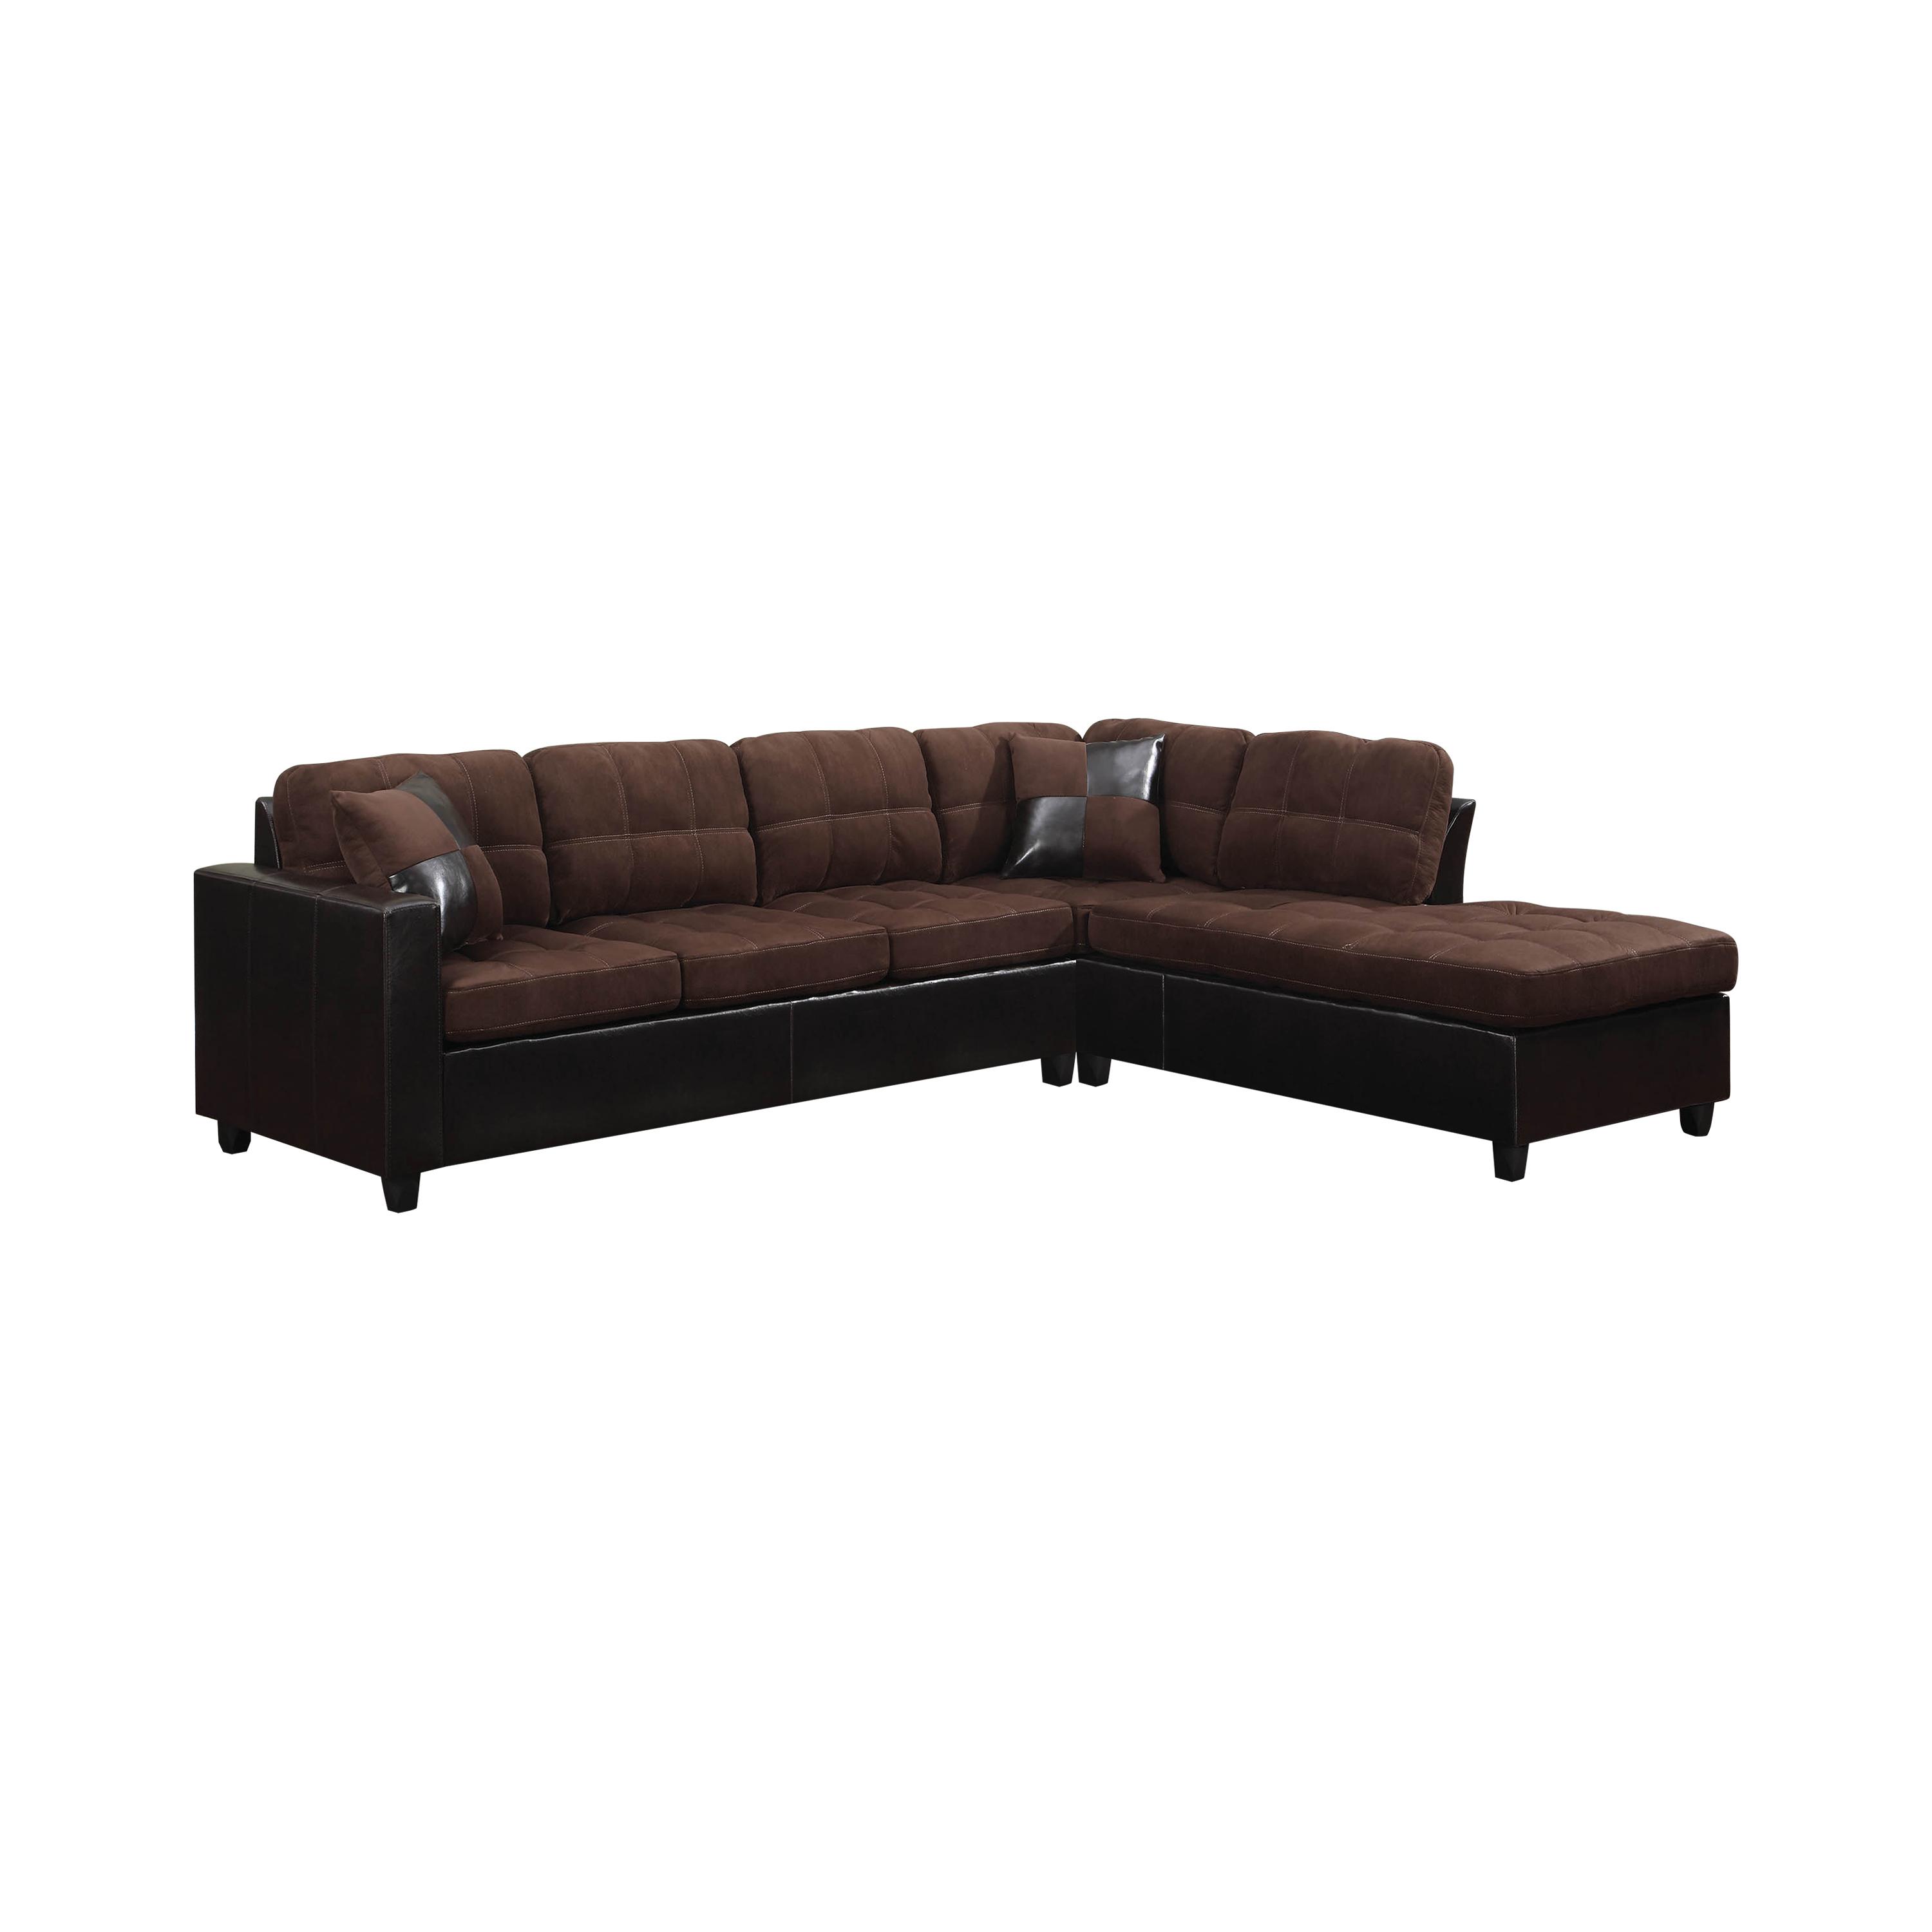 Contemporary Sectional 505655 Mallory 505655 in Chocolate Microfiber